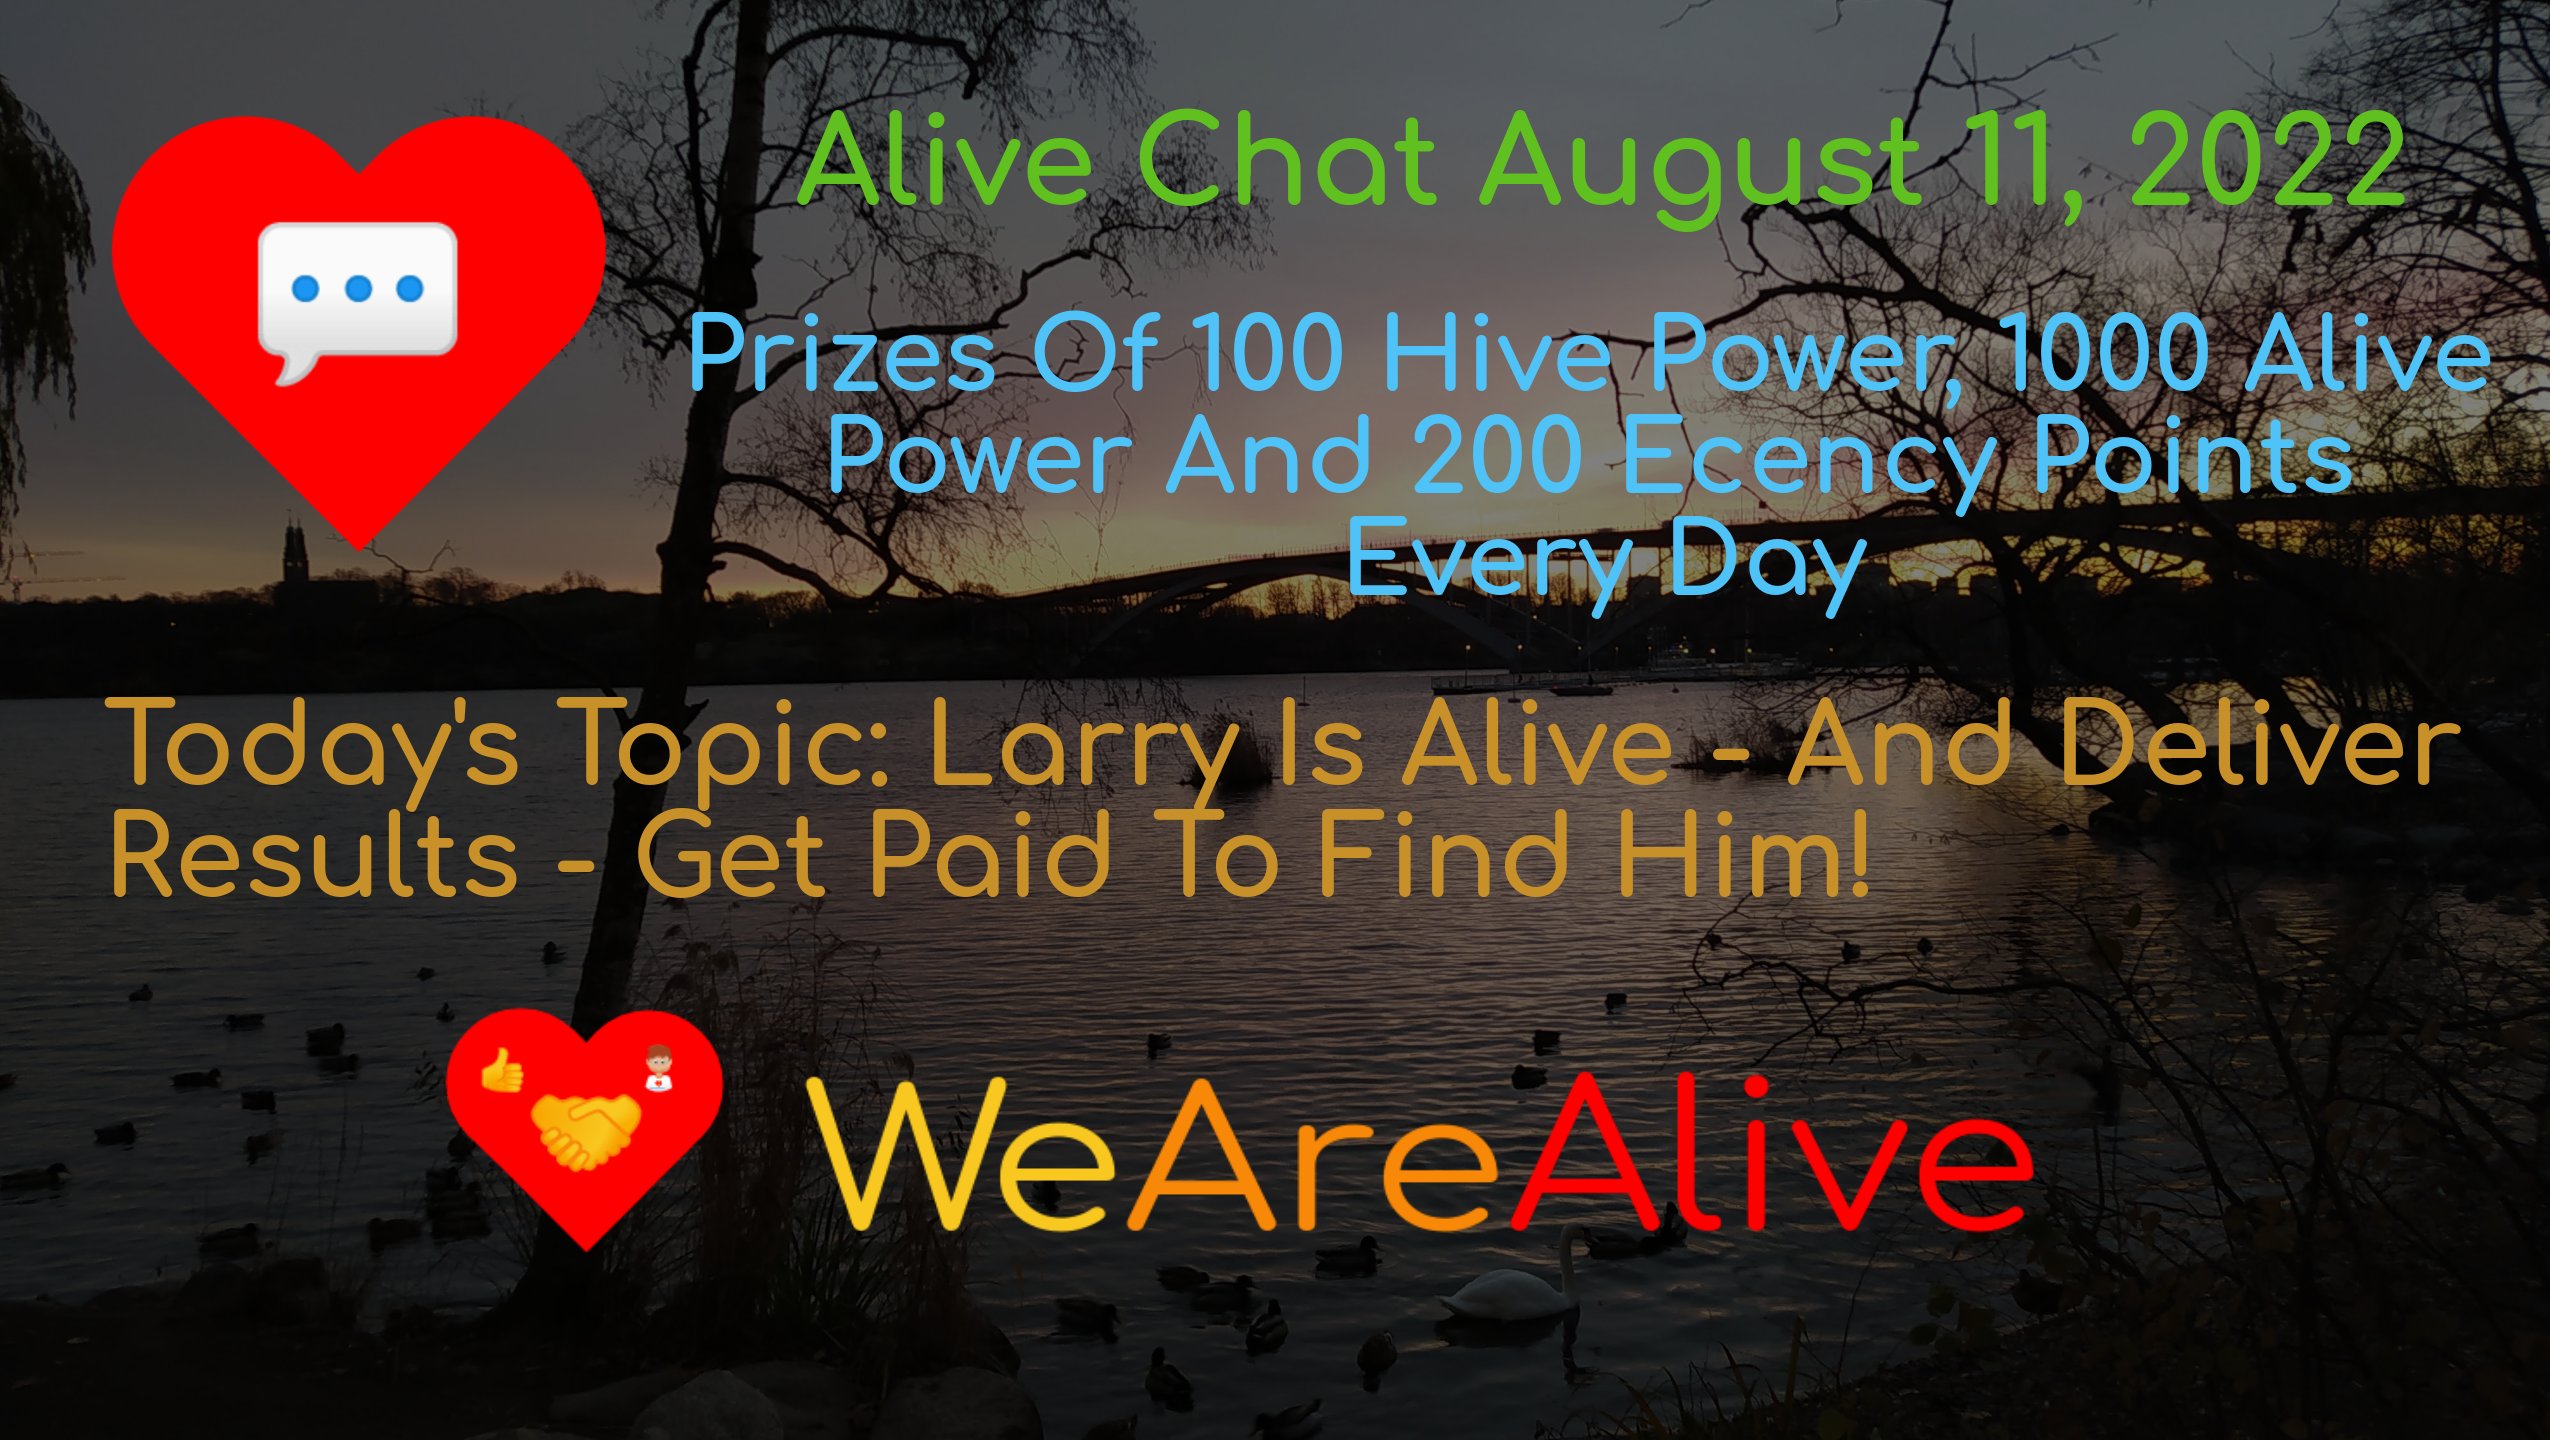 @alive.chat/alive-chat-august-11-2022-daily-prize-drawing-open-for-entries-todays-topic-larry-is-alive-and-deliver-results-get-paid-to-fin